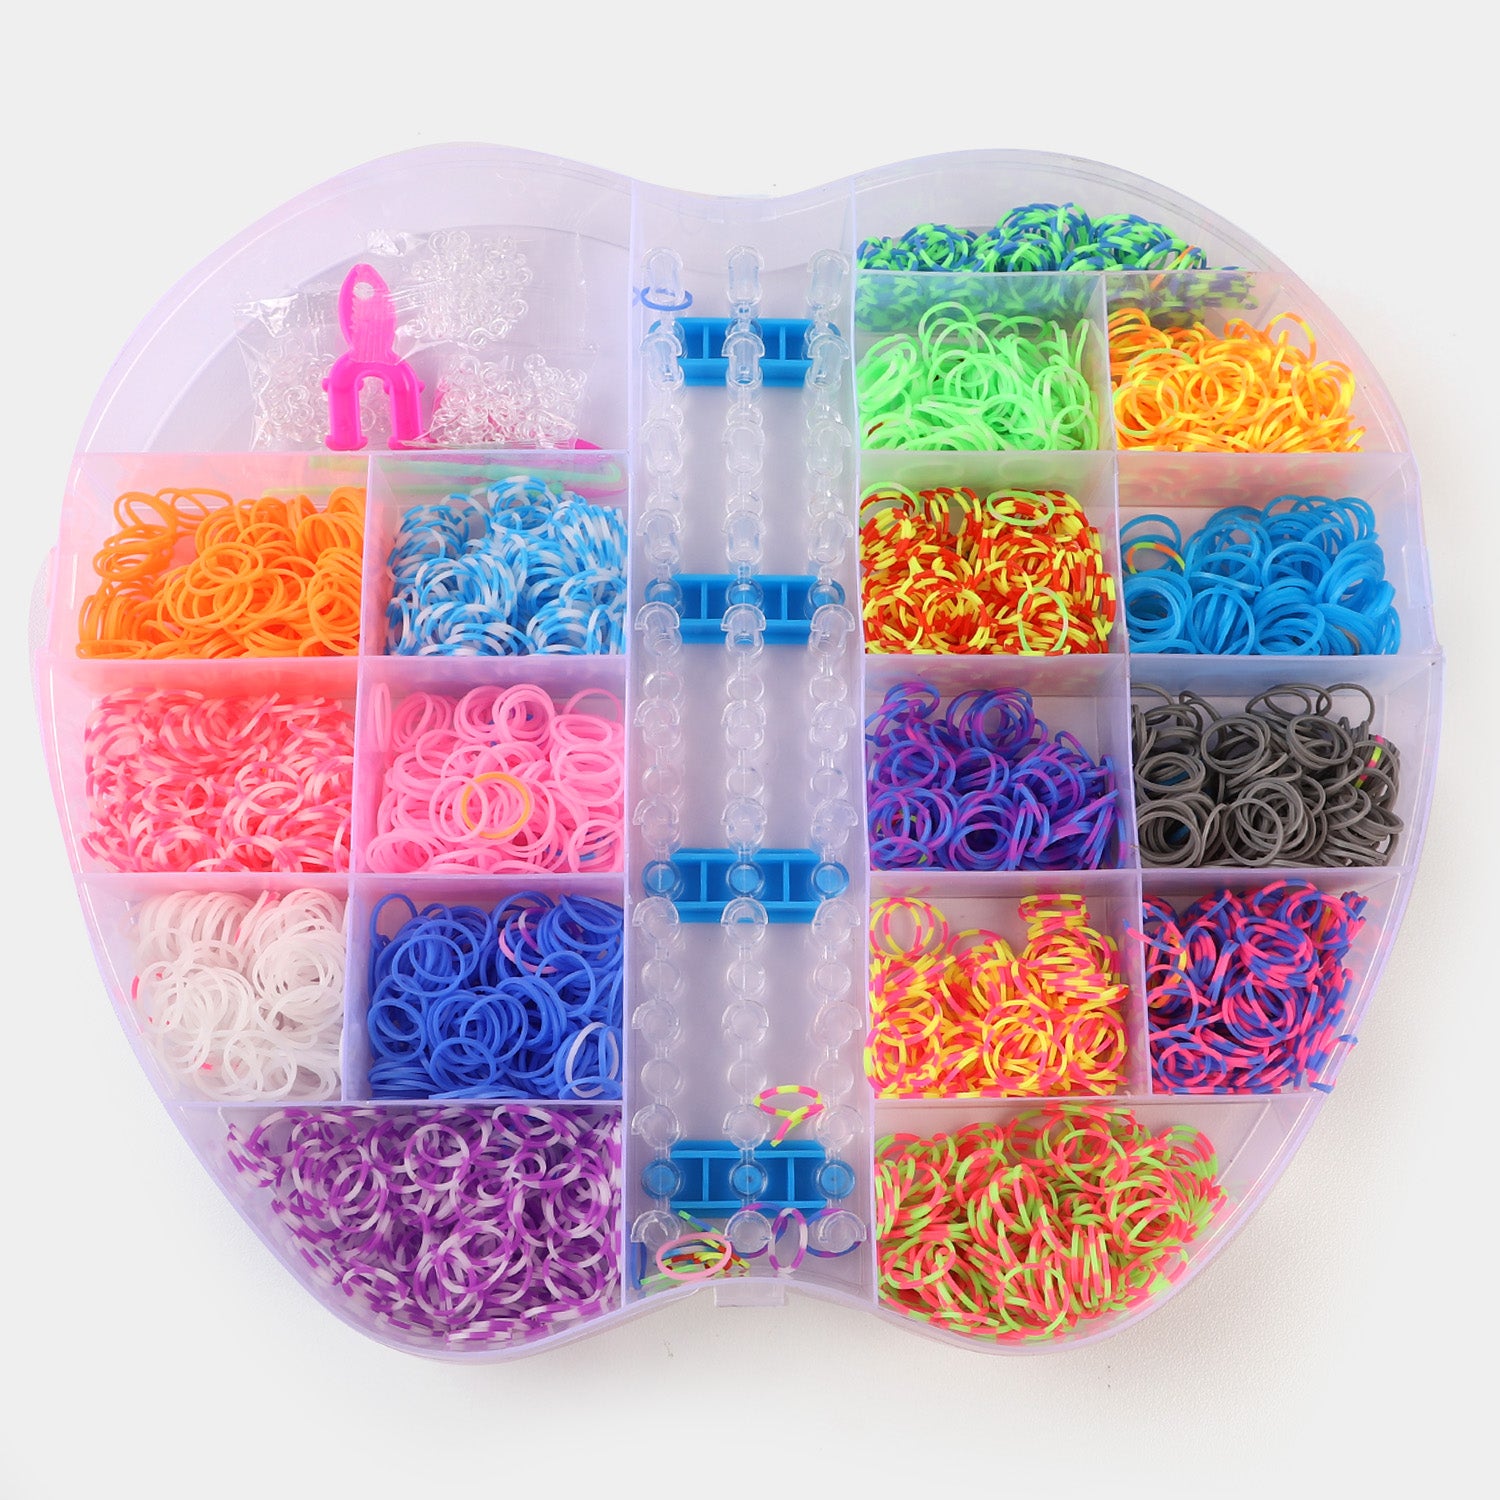 Buy Loom Rubber Bands Bracelet Kit With Premium Quality Accessories at Best  Price In Pakistan